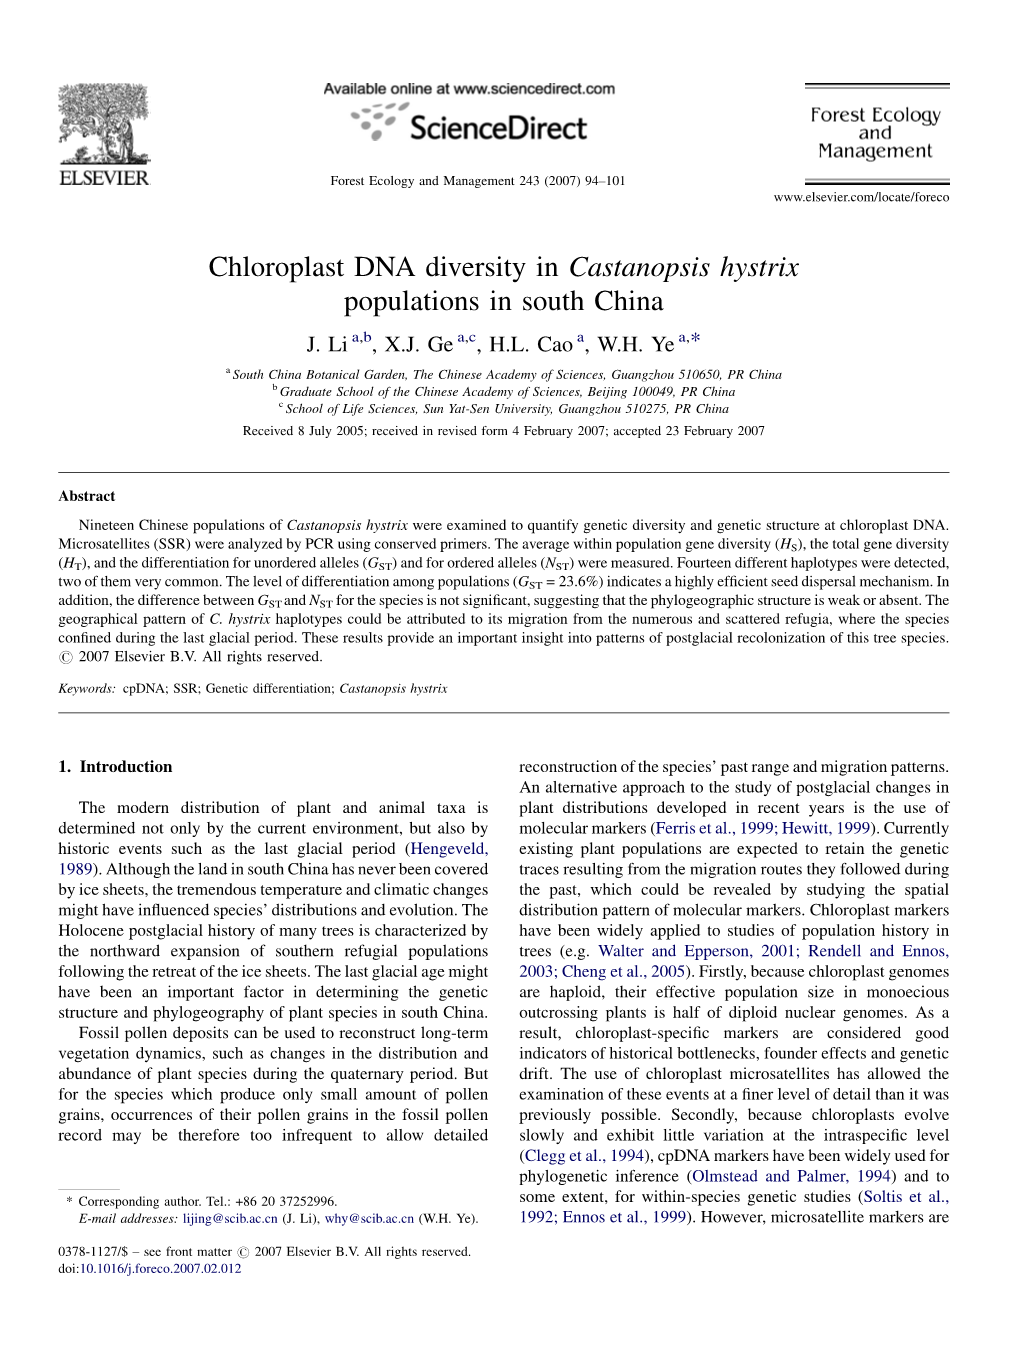 Chloroplast DNA Diversity in Castanopsis Hystrix Populations in South China J